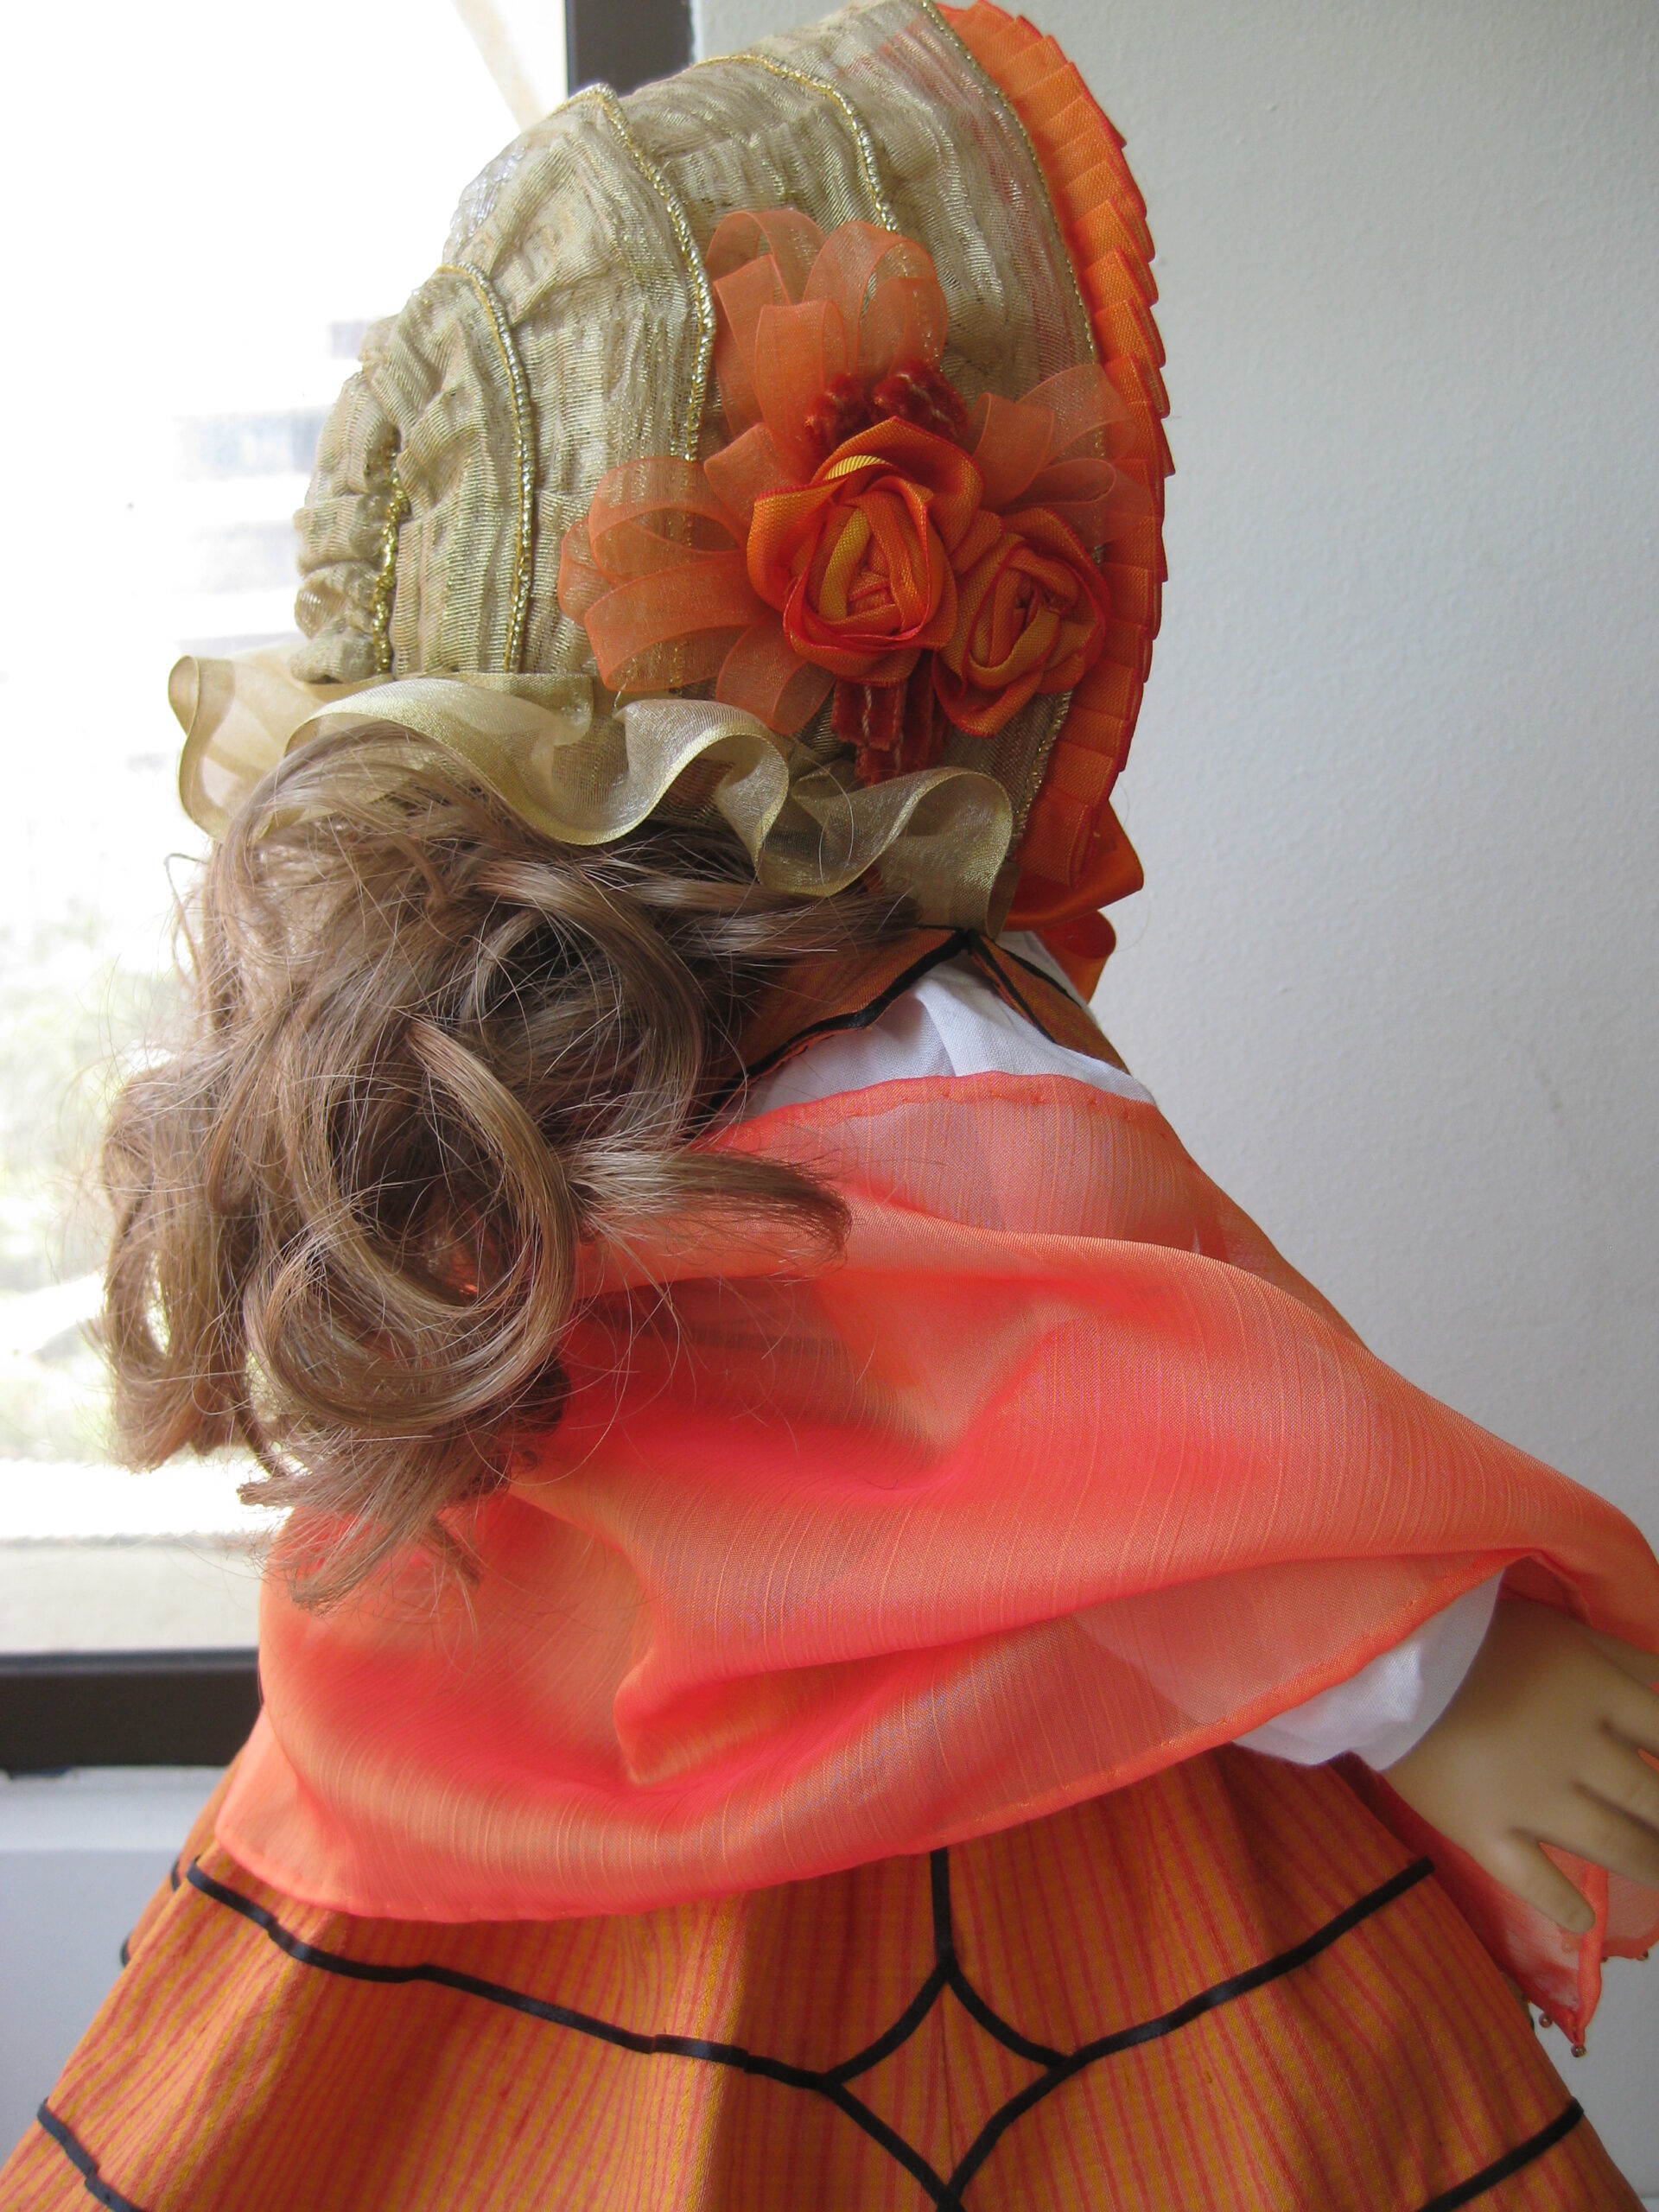 An American girl doll wears a drawn bonnet with an orange shawl and dress